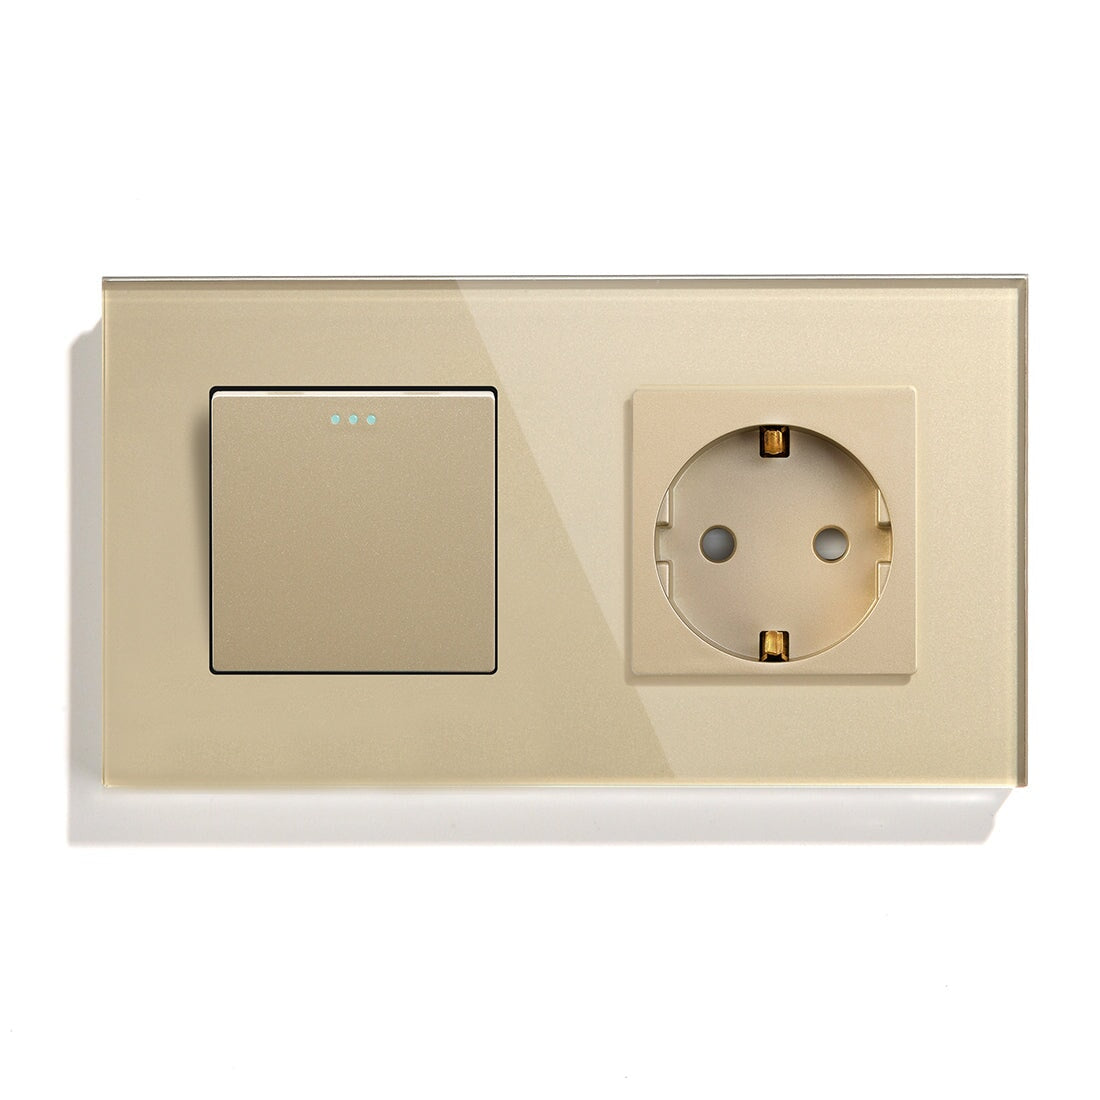 BSEED Mechanical 1/2/3 Gang 1/2Way Touch Light Switch With Normal Eu Socket Power Outlets & Sockets Bseedswitch Golden 1Gang 1Way